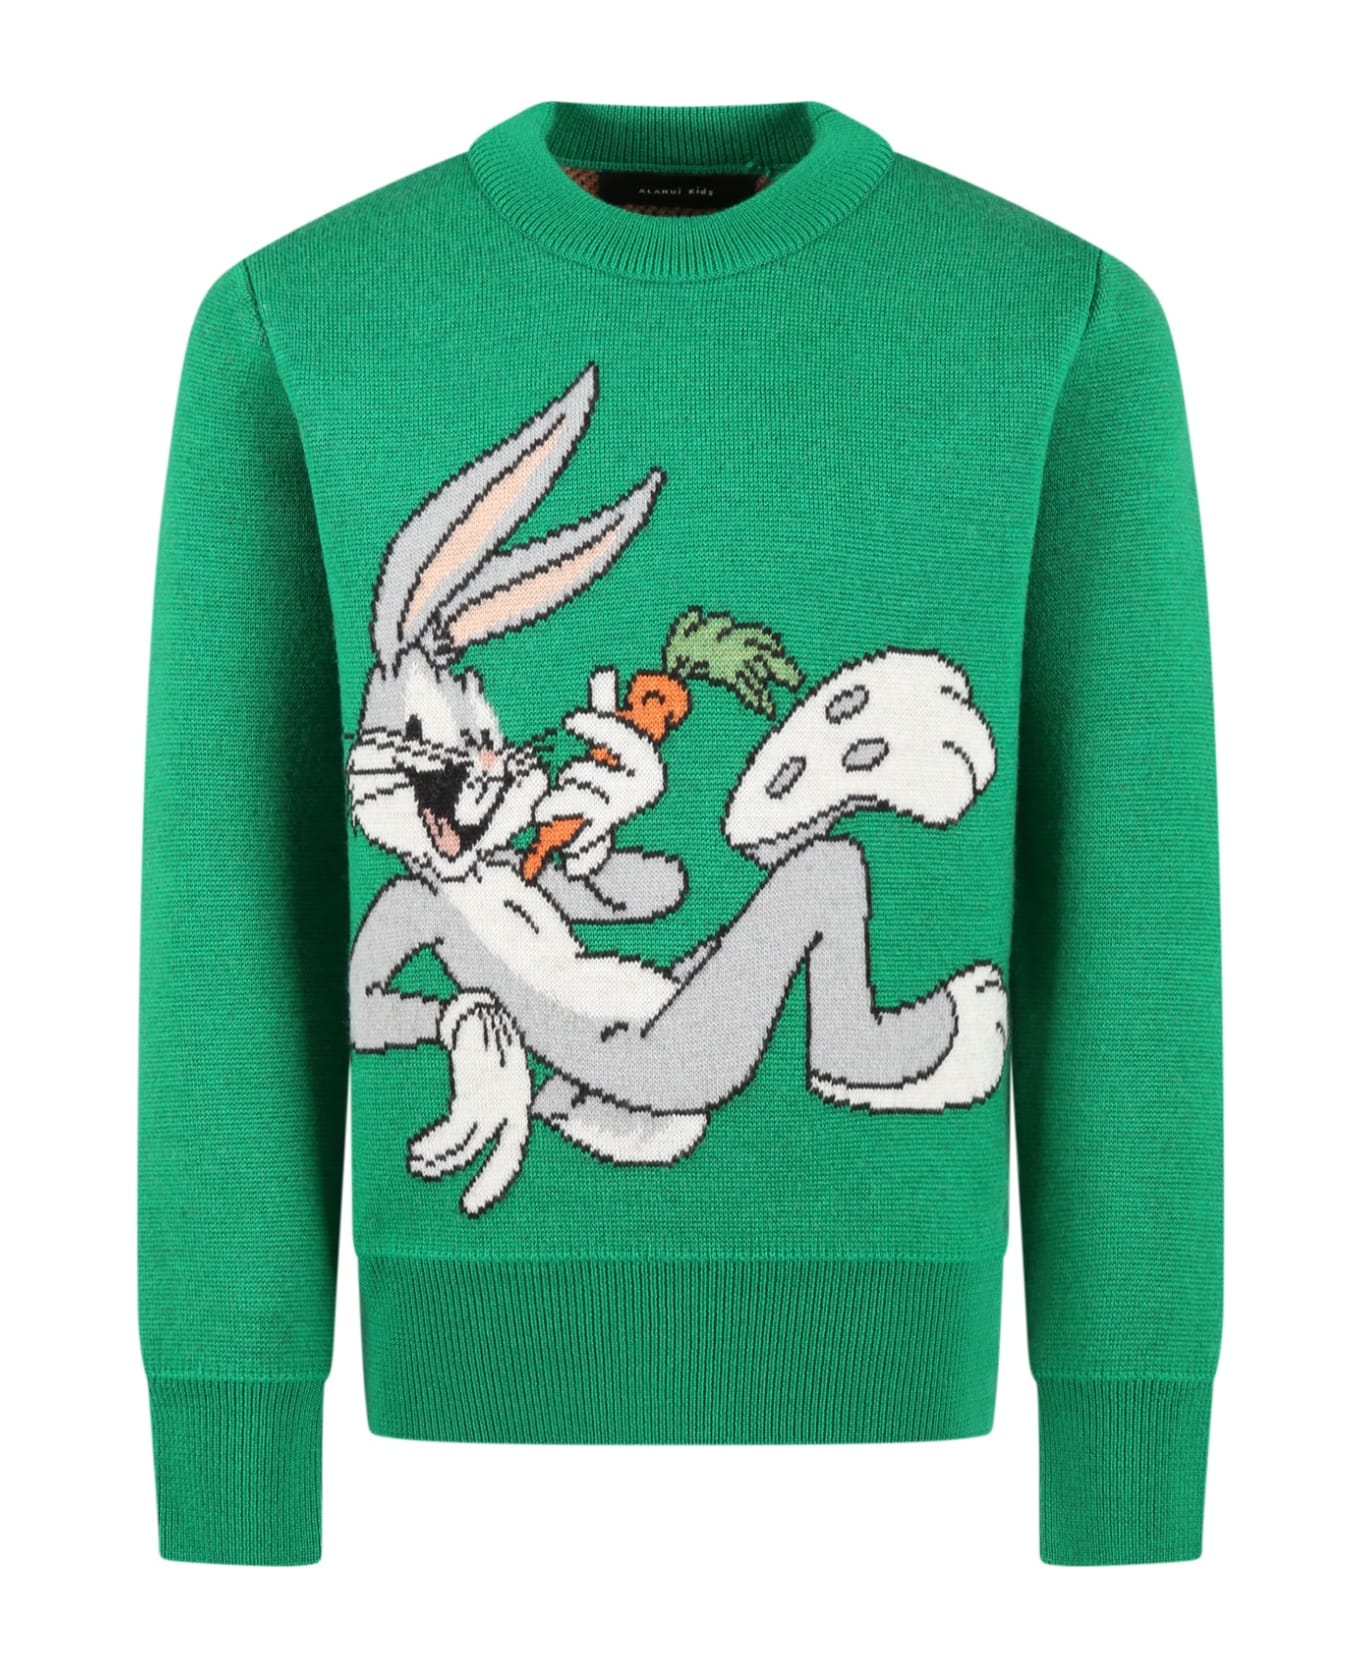 Alanui Green Sweater For Kids With Bugs Bunny - Green